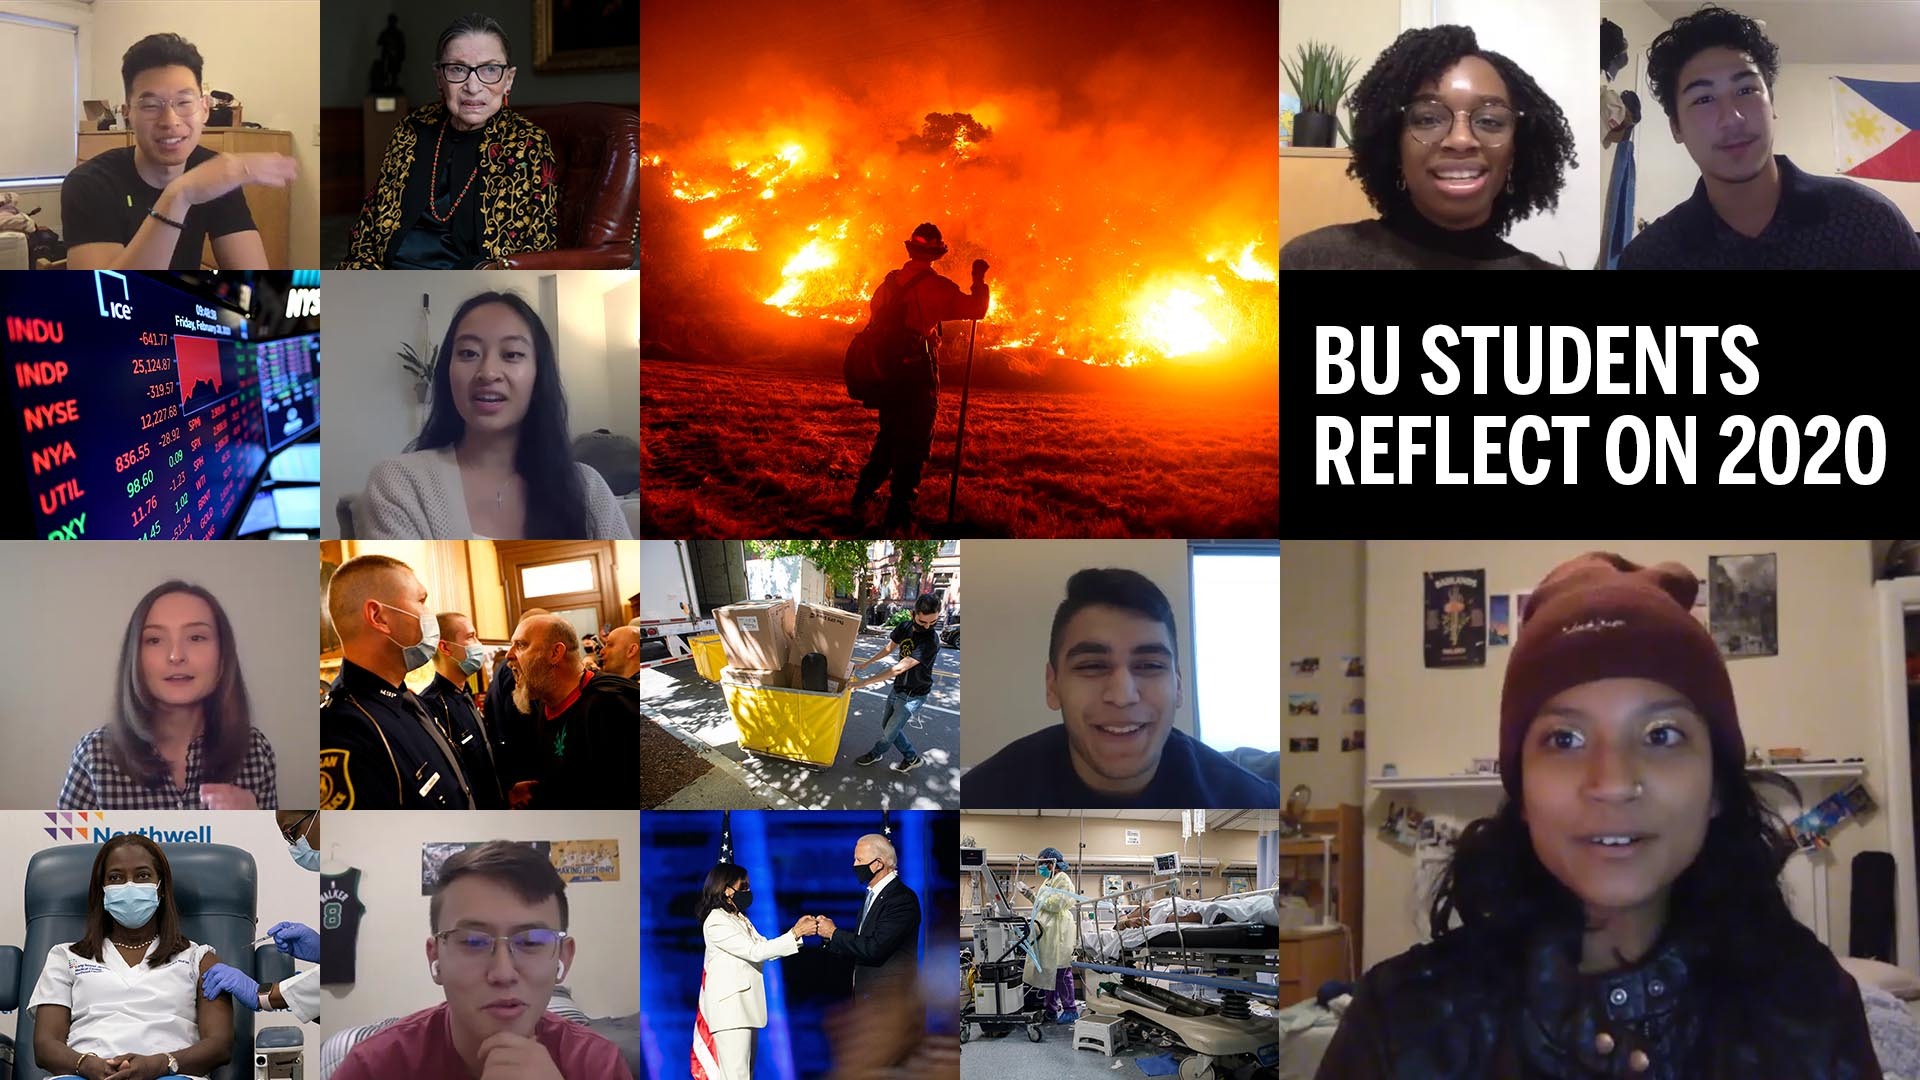 Composite image of students and memorable moments from 2020, including the California Wild Fires, a portrait of Ruth Bader Ginsburg, protestors yelling at copes, students moving into BU with masks on, Joe Biden and Kamala Harris doing a knuckle-touch, COVID patients in the hospital, and one of first people in the US receiving a coronavirus vaccine.